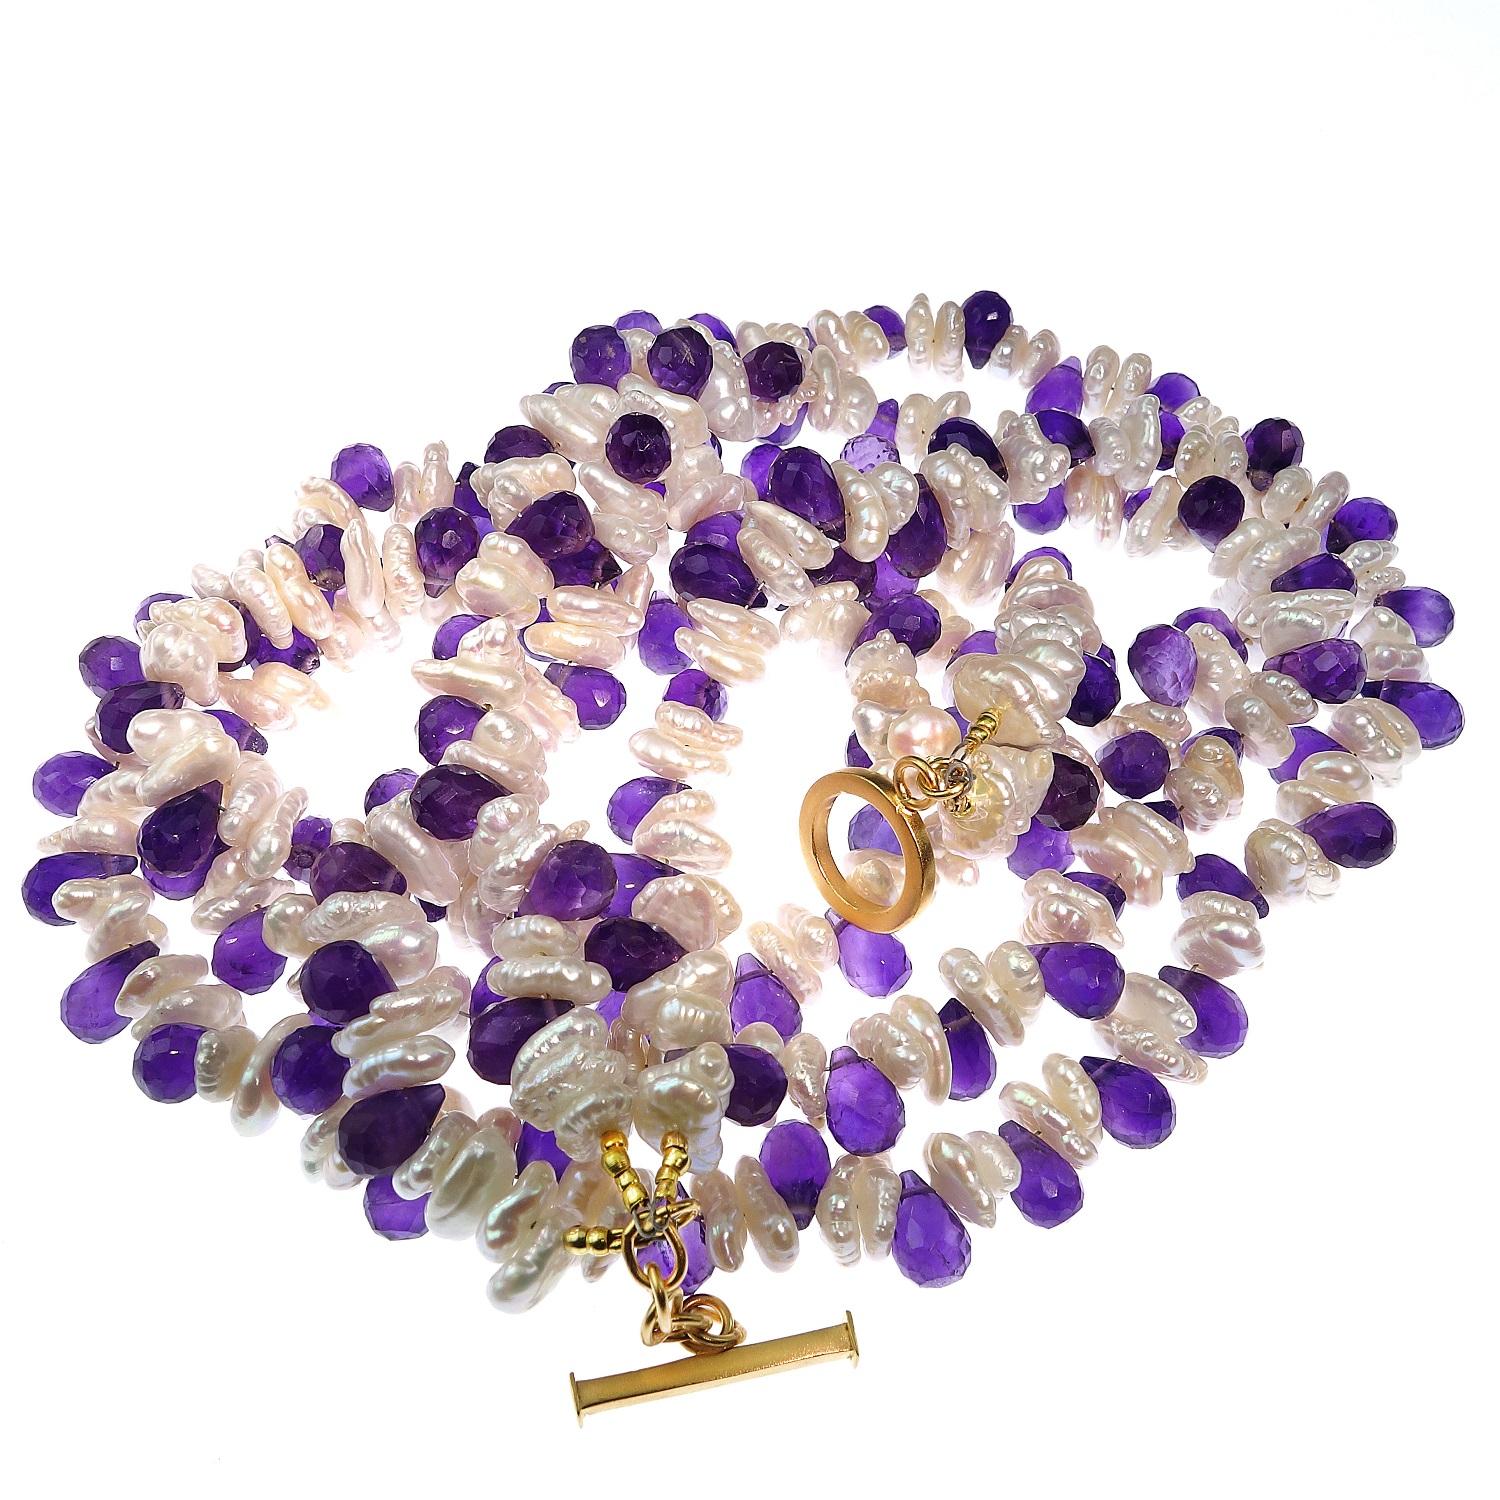 Triple strand Pearl and Amethyst Necklace  February Birthstone